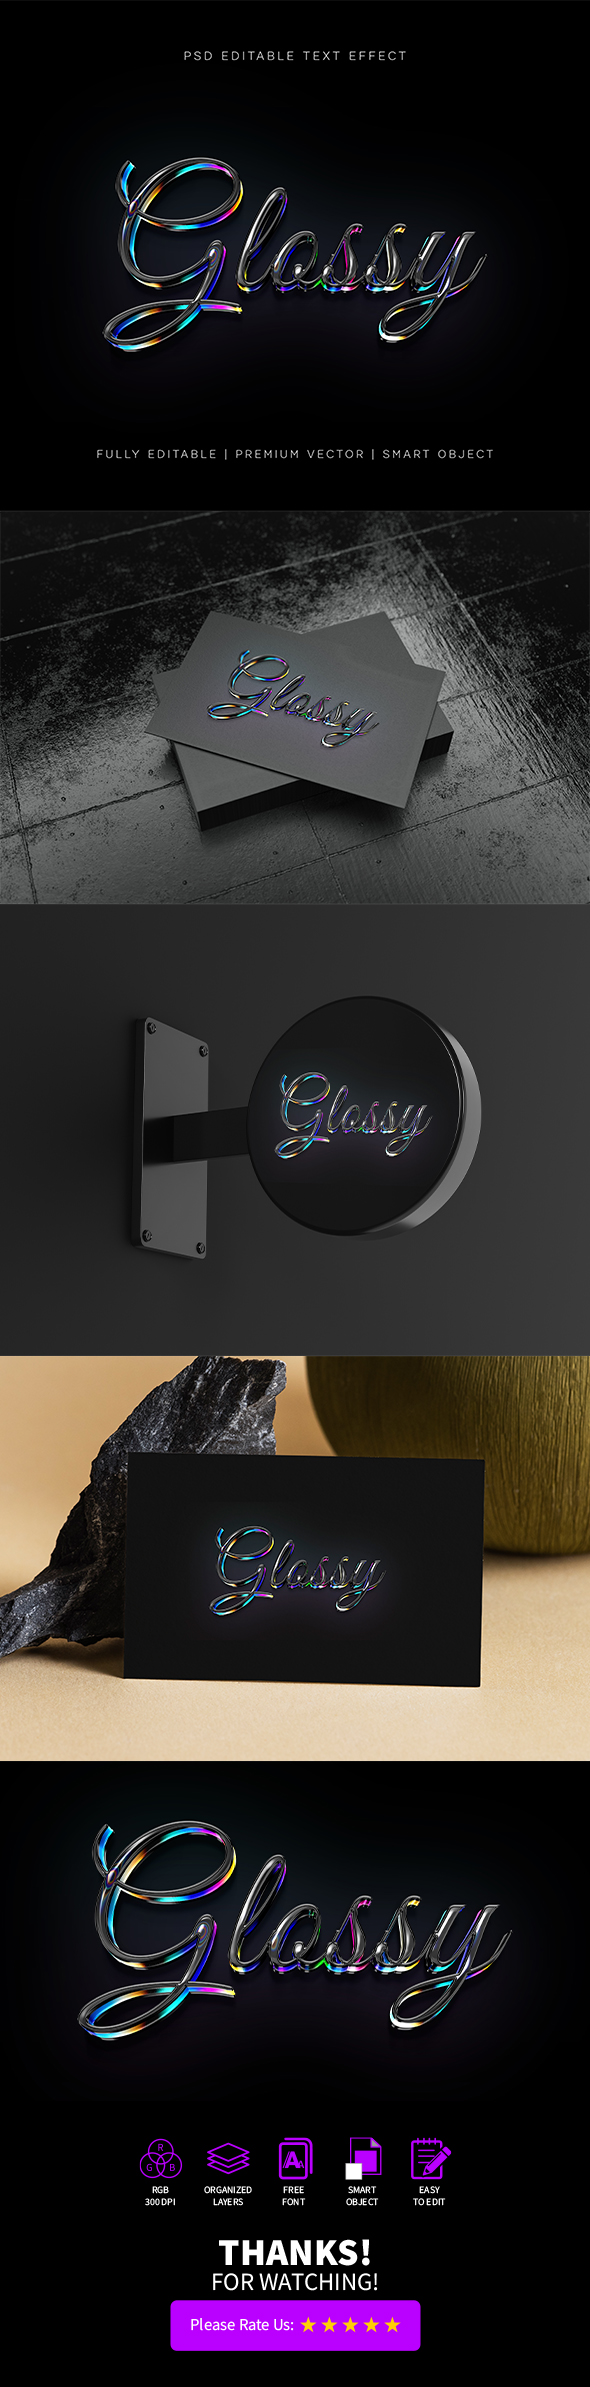 [DOWNLOAD]Glossy_3D_ metallic_Text_effect